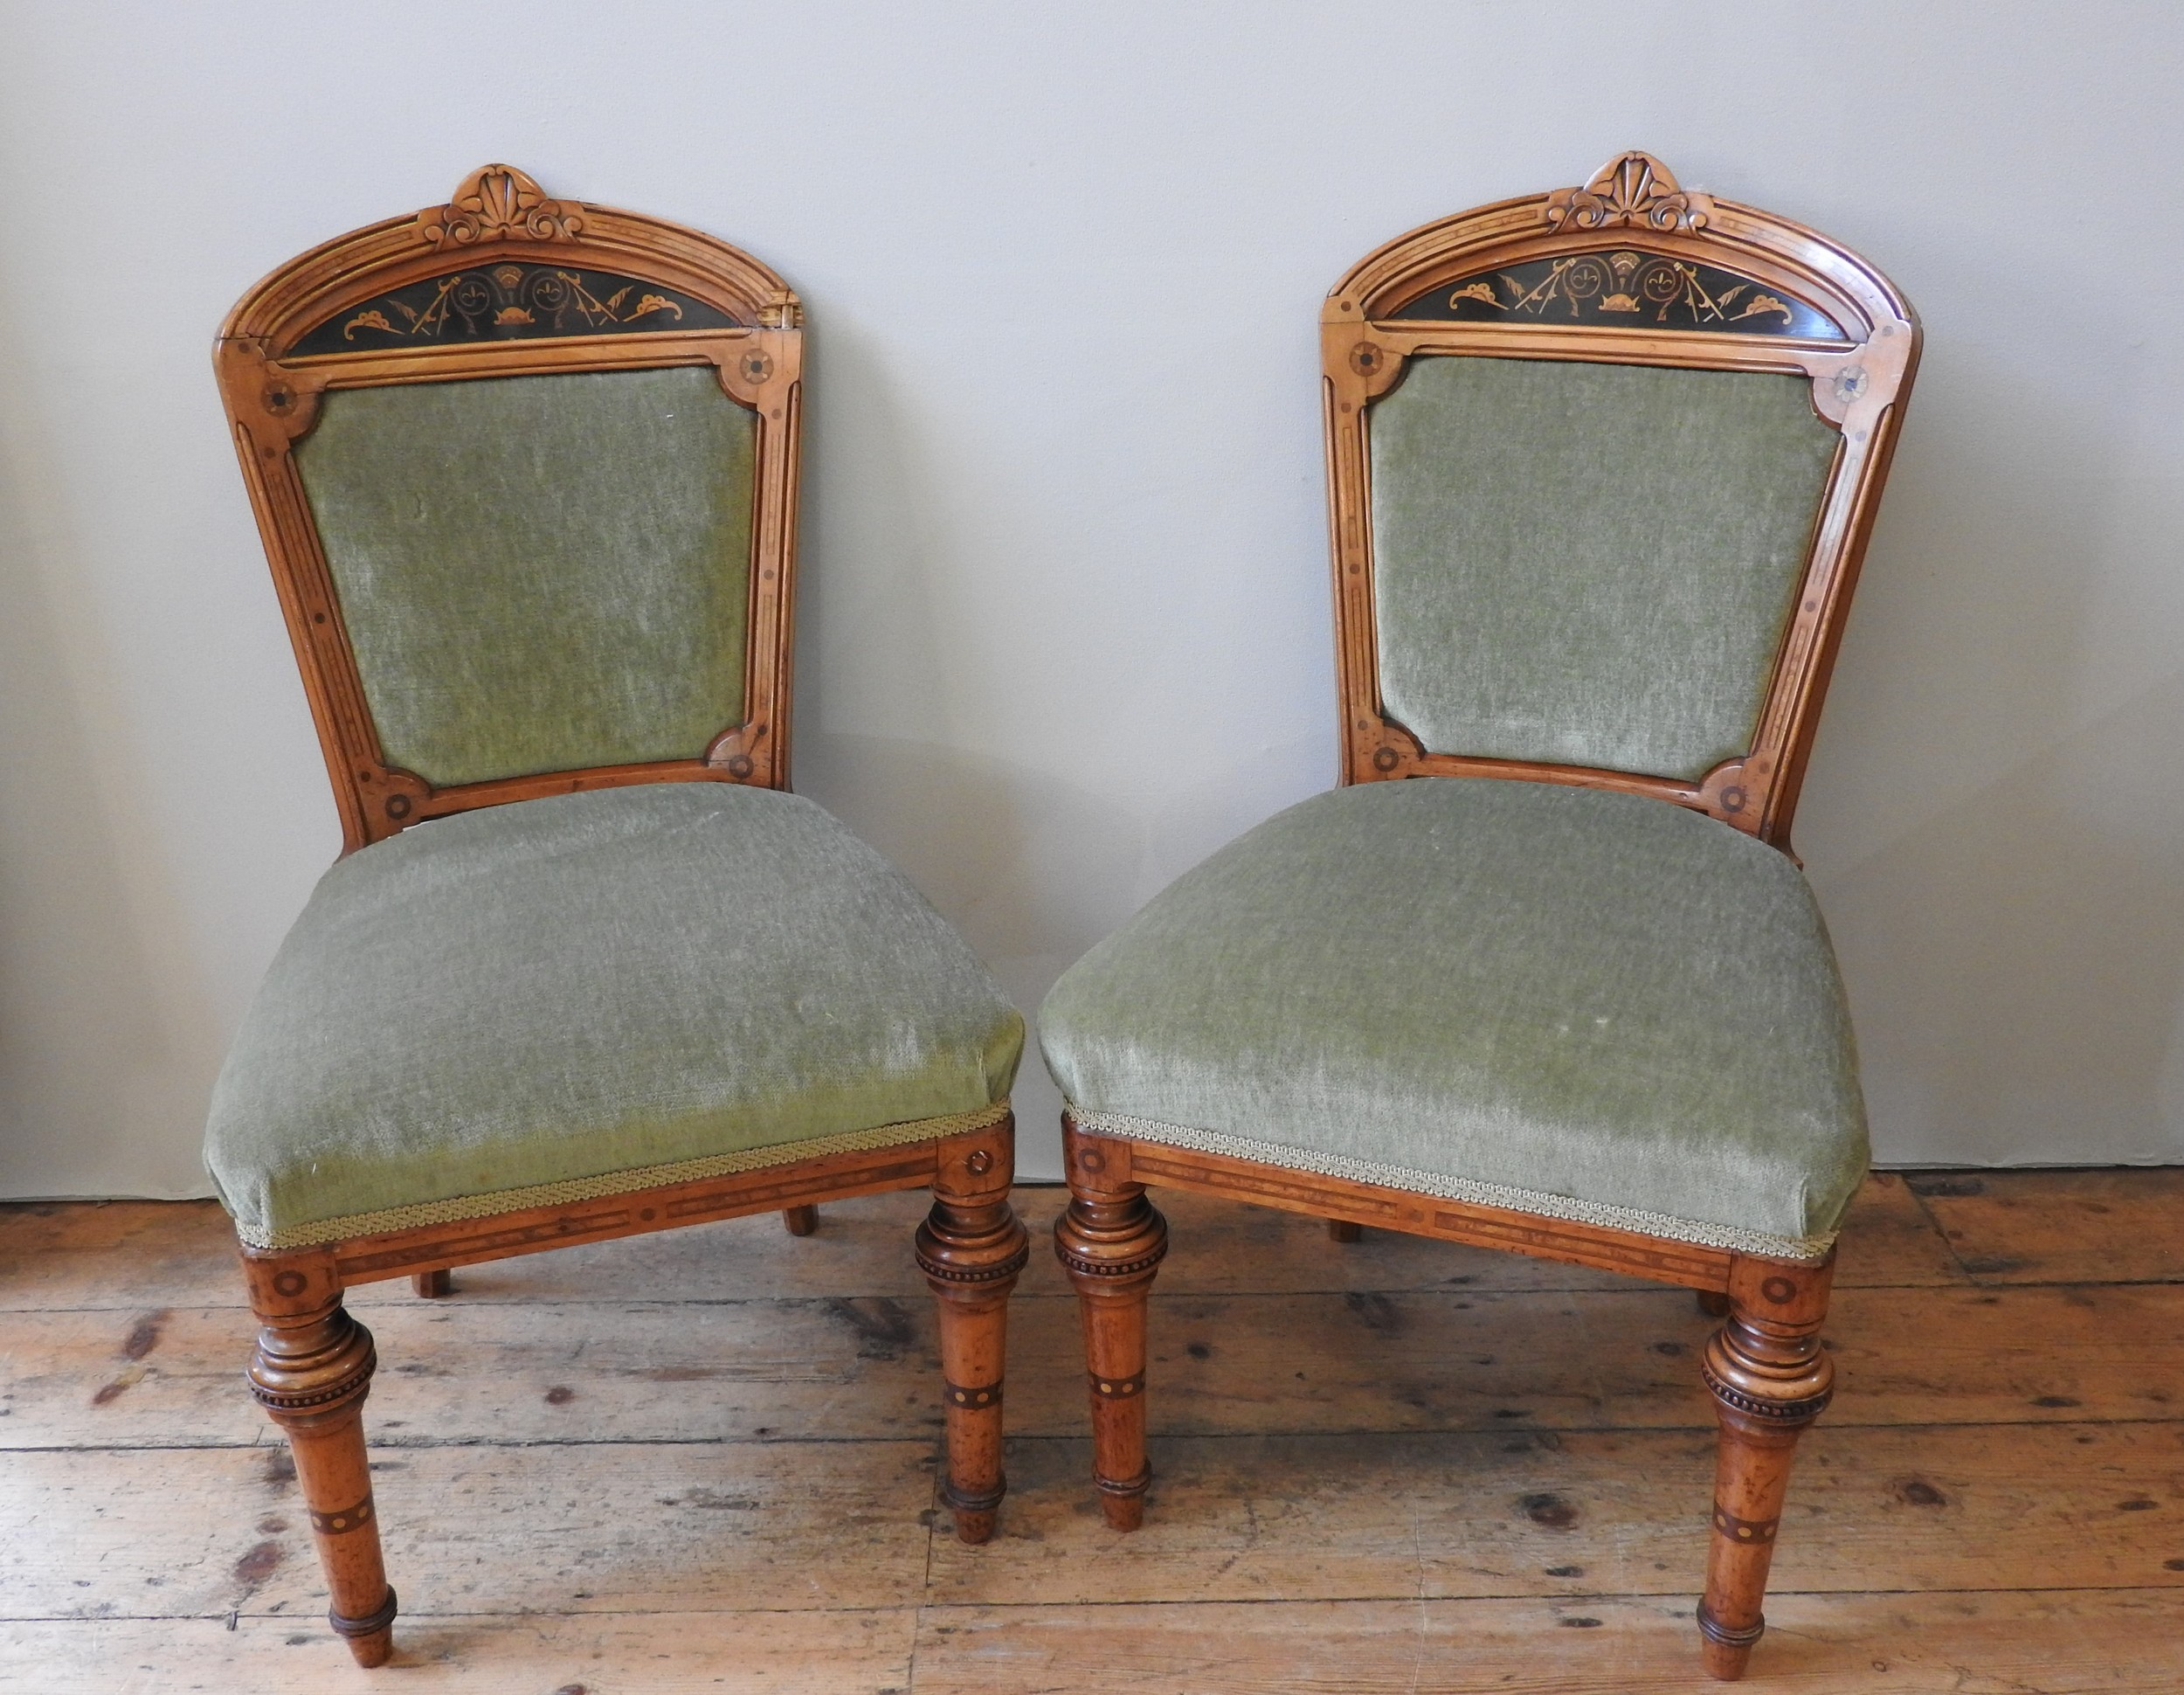 A PAIR OF LATE 19TH CENTURY SATIN WOOD MARQUETRY INLAID CHAIRS, in the Aesthetic Movement style,